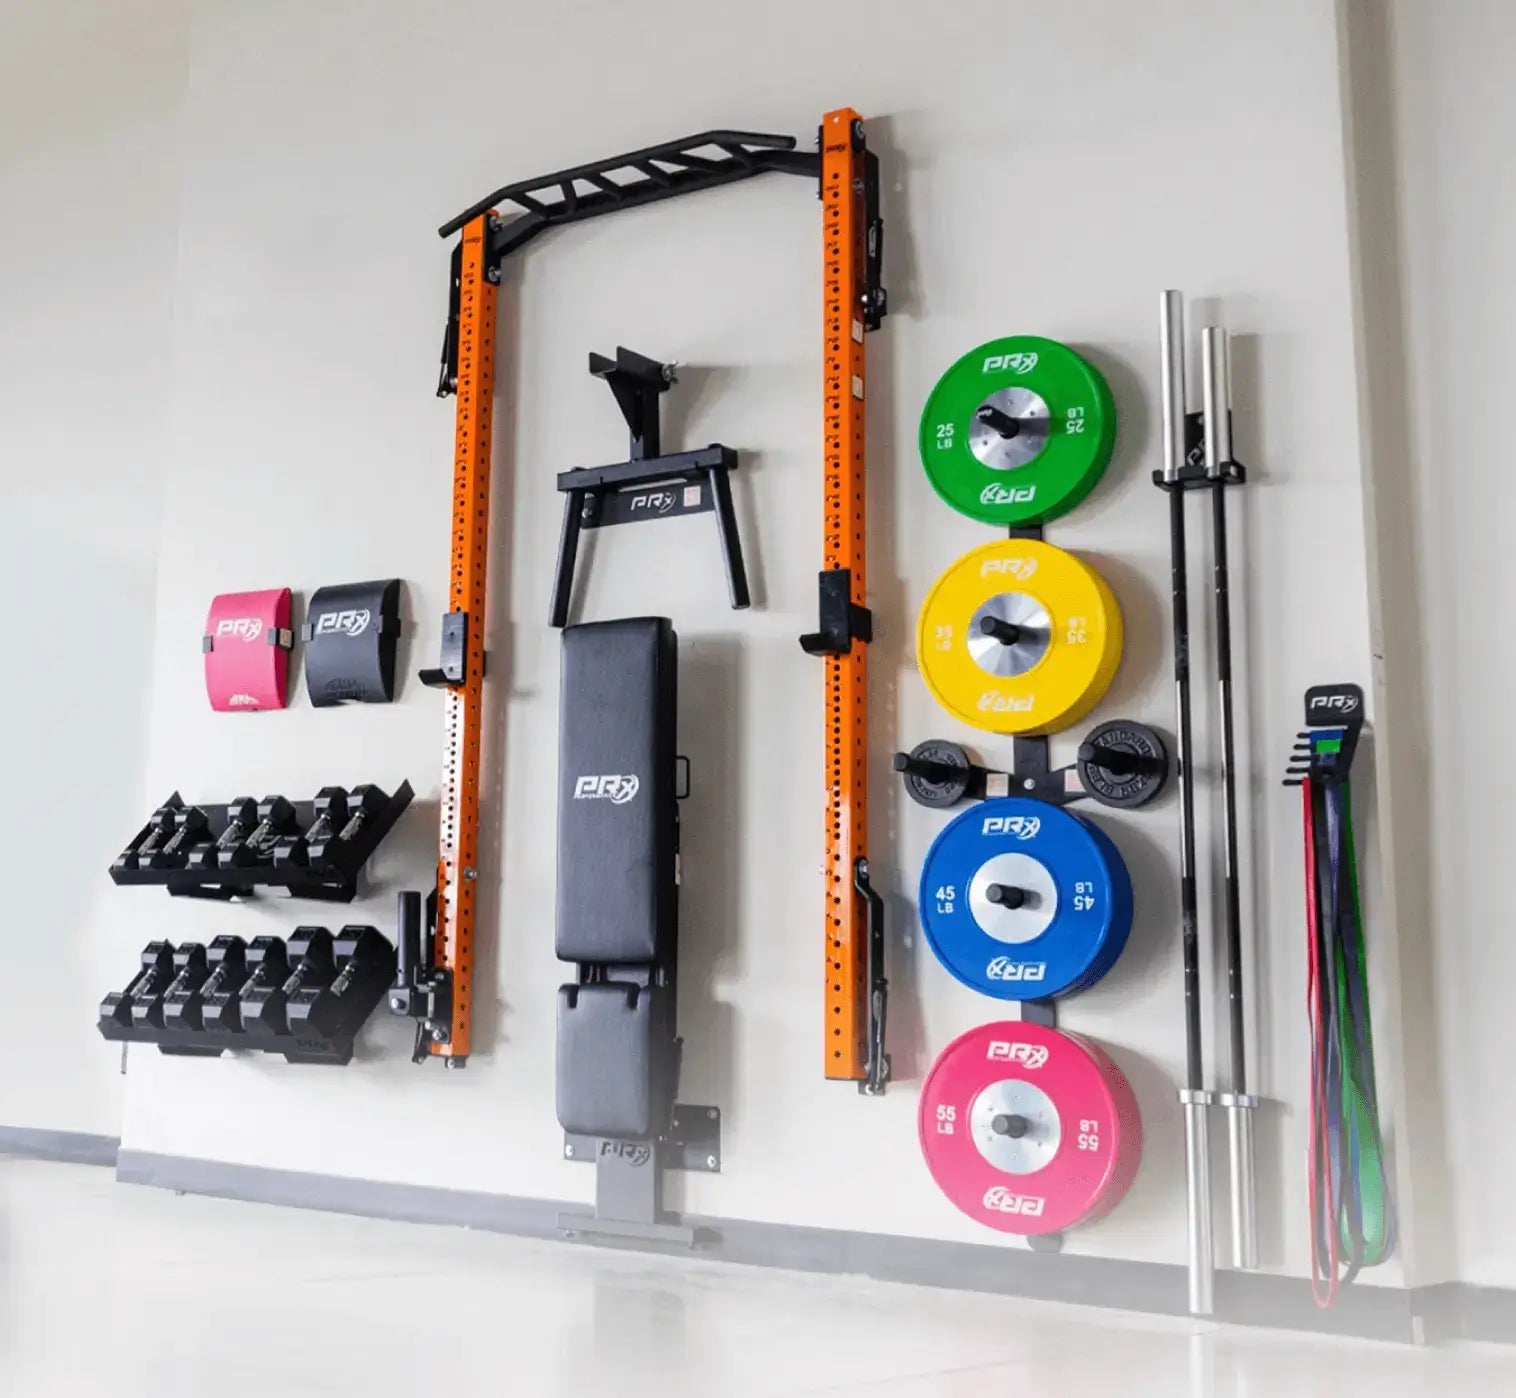 Portable Home Gym Workout Equipment with 16 Exercise Accessories